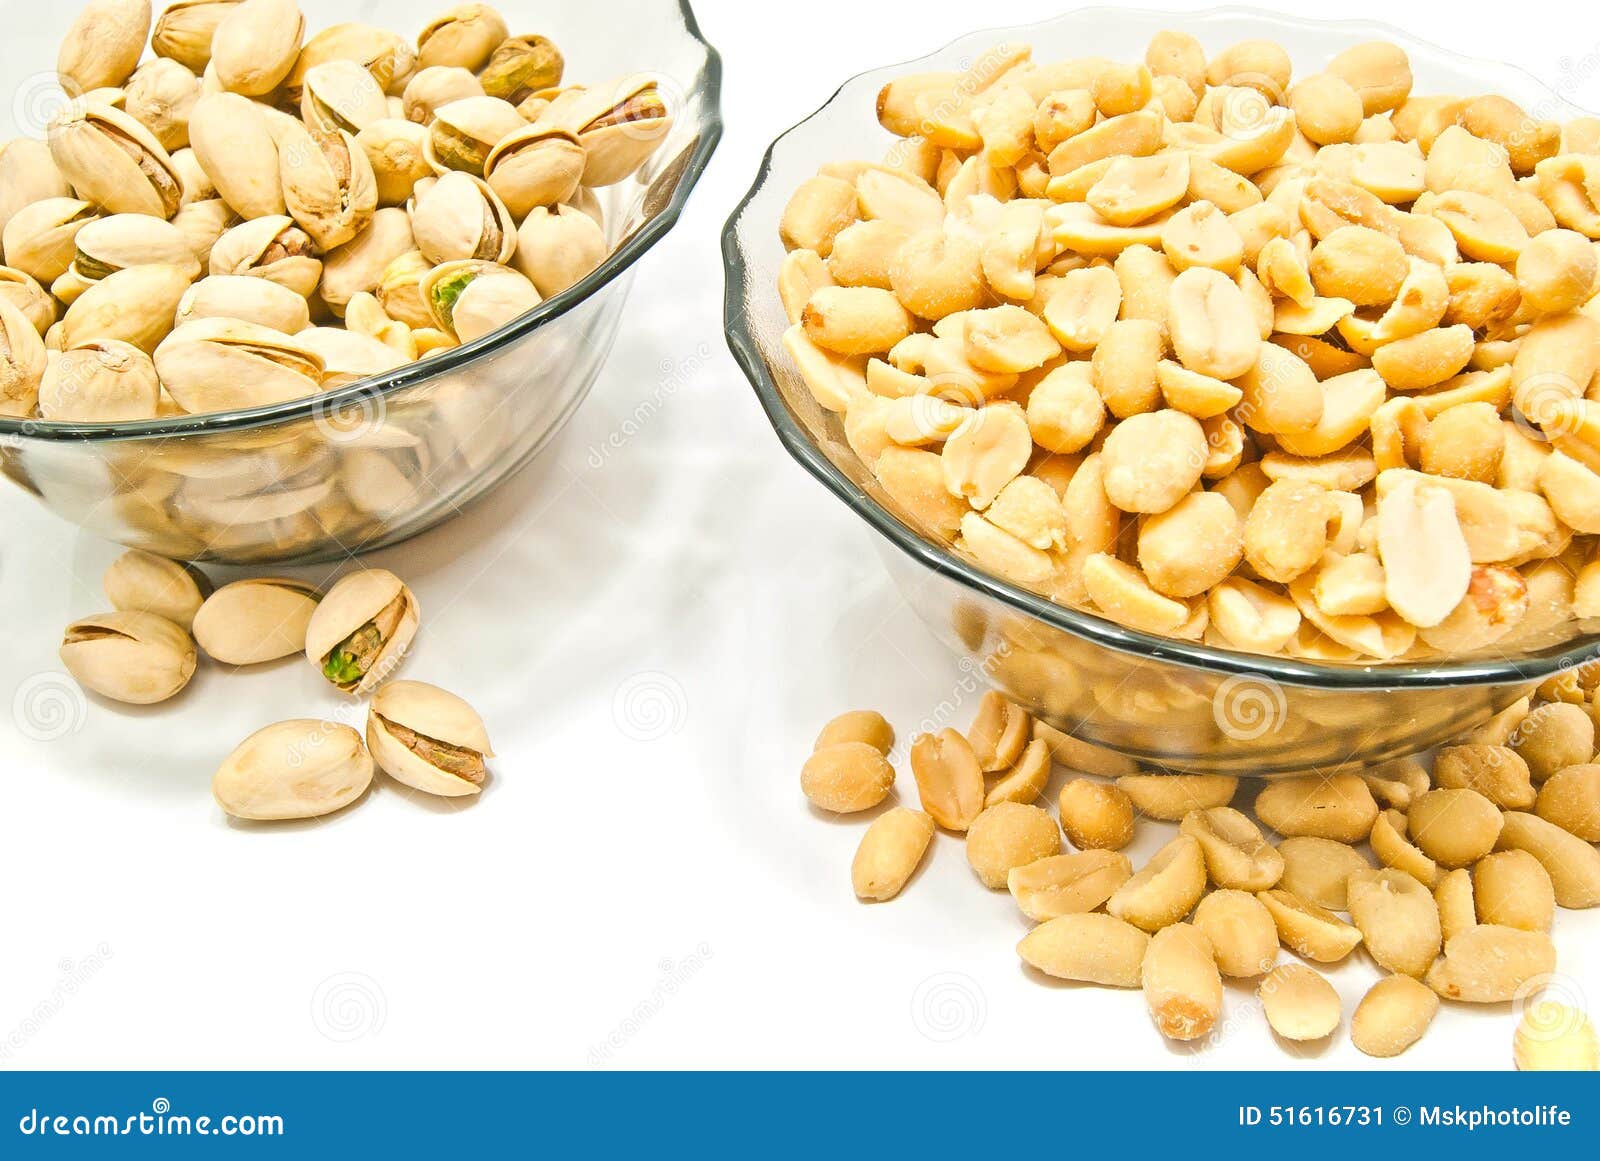 two dish with different nuts